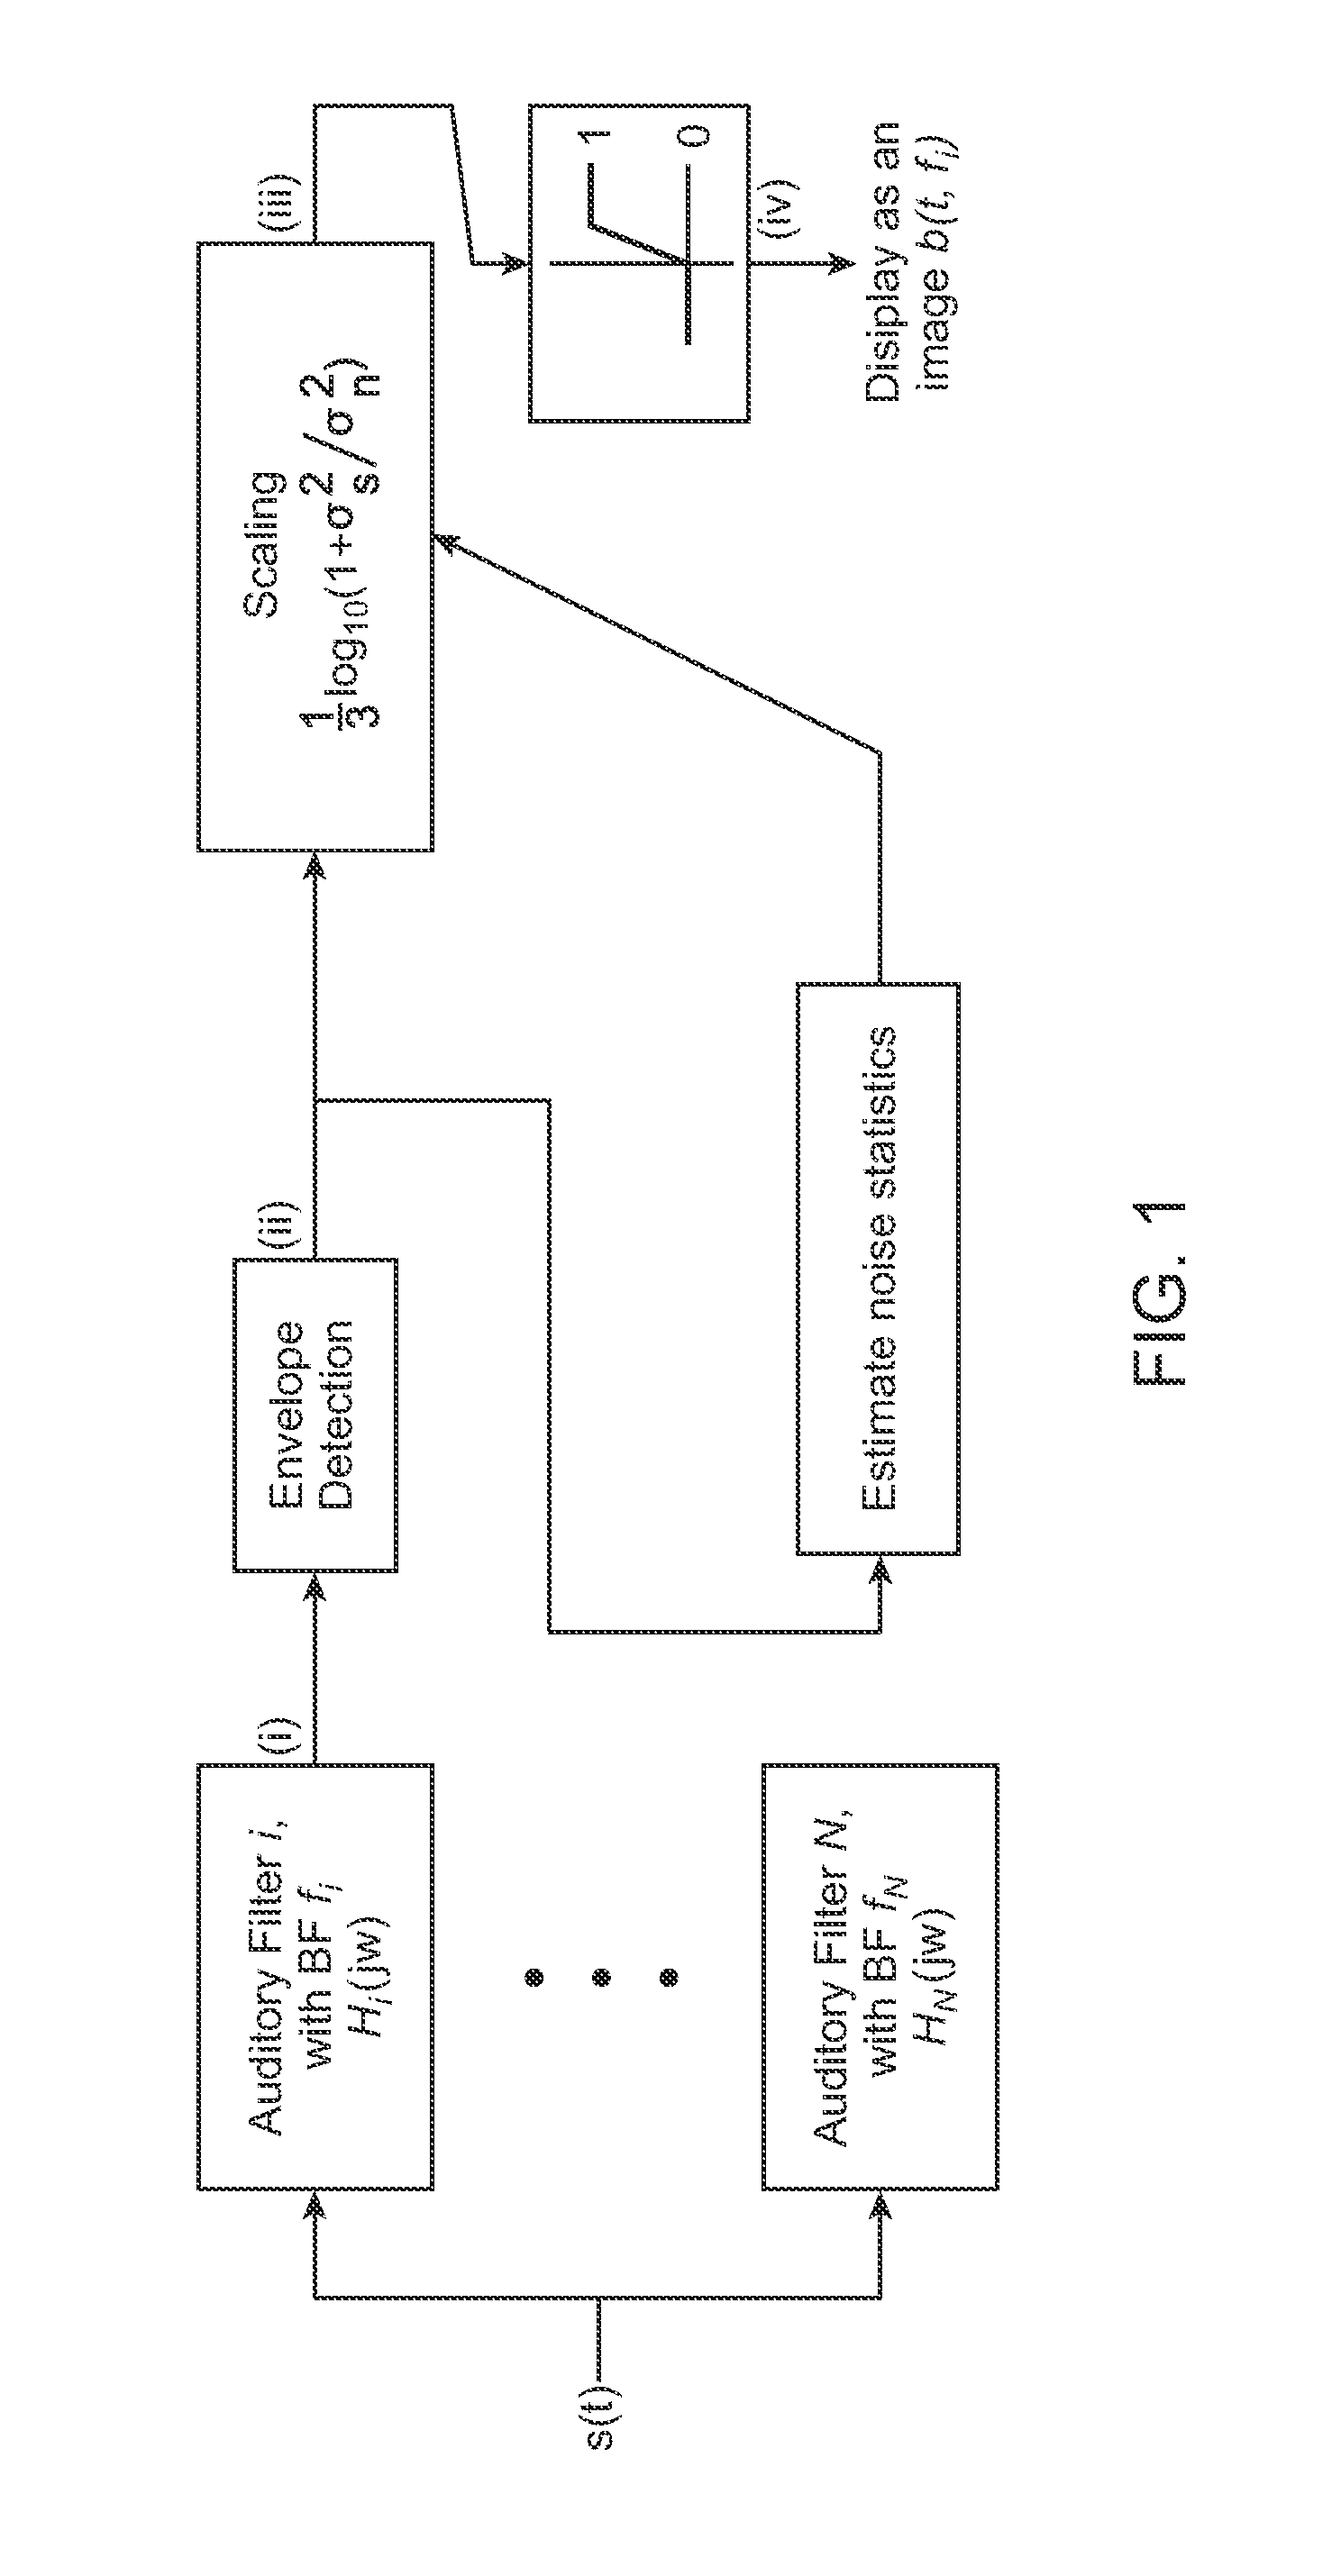 Systems and methods for identifying speech sound features